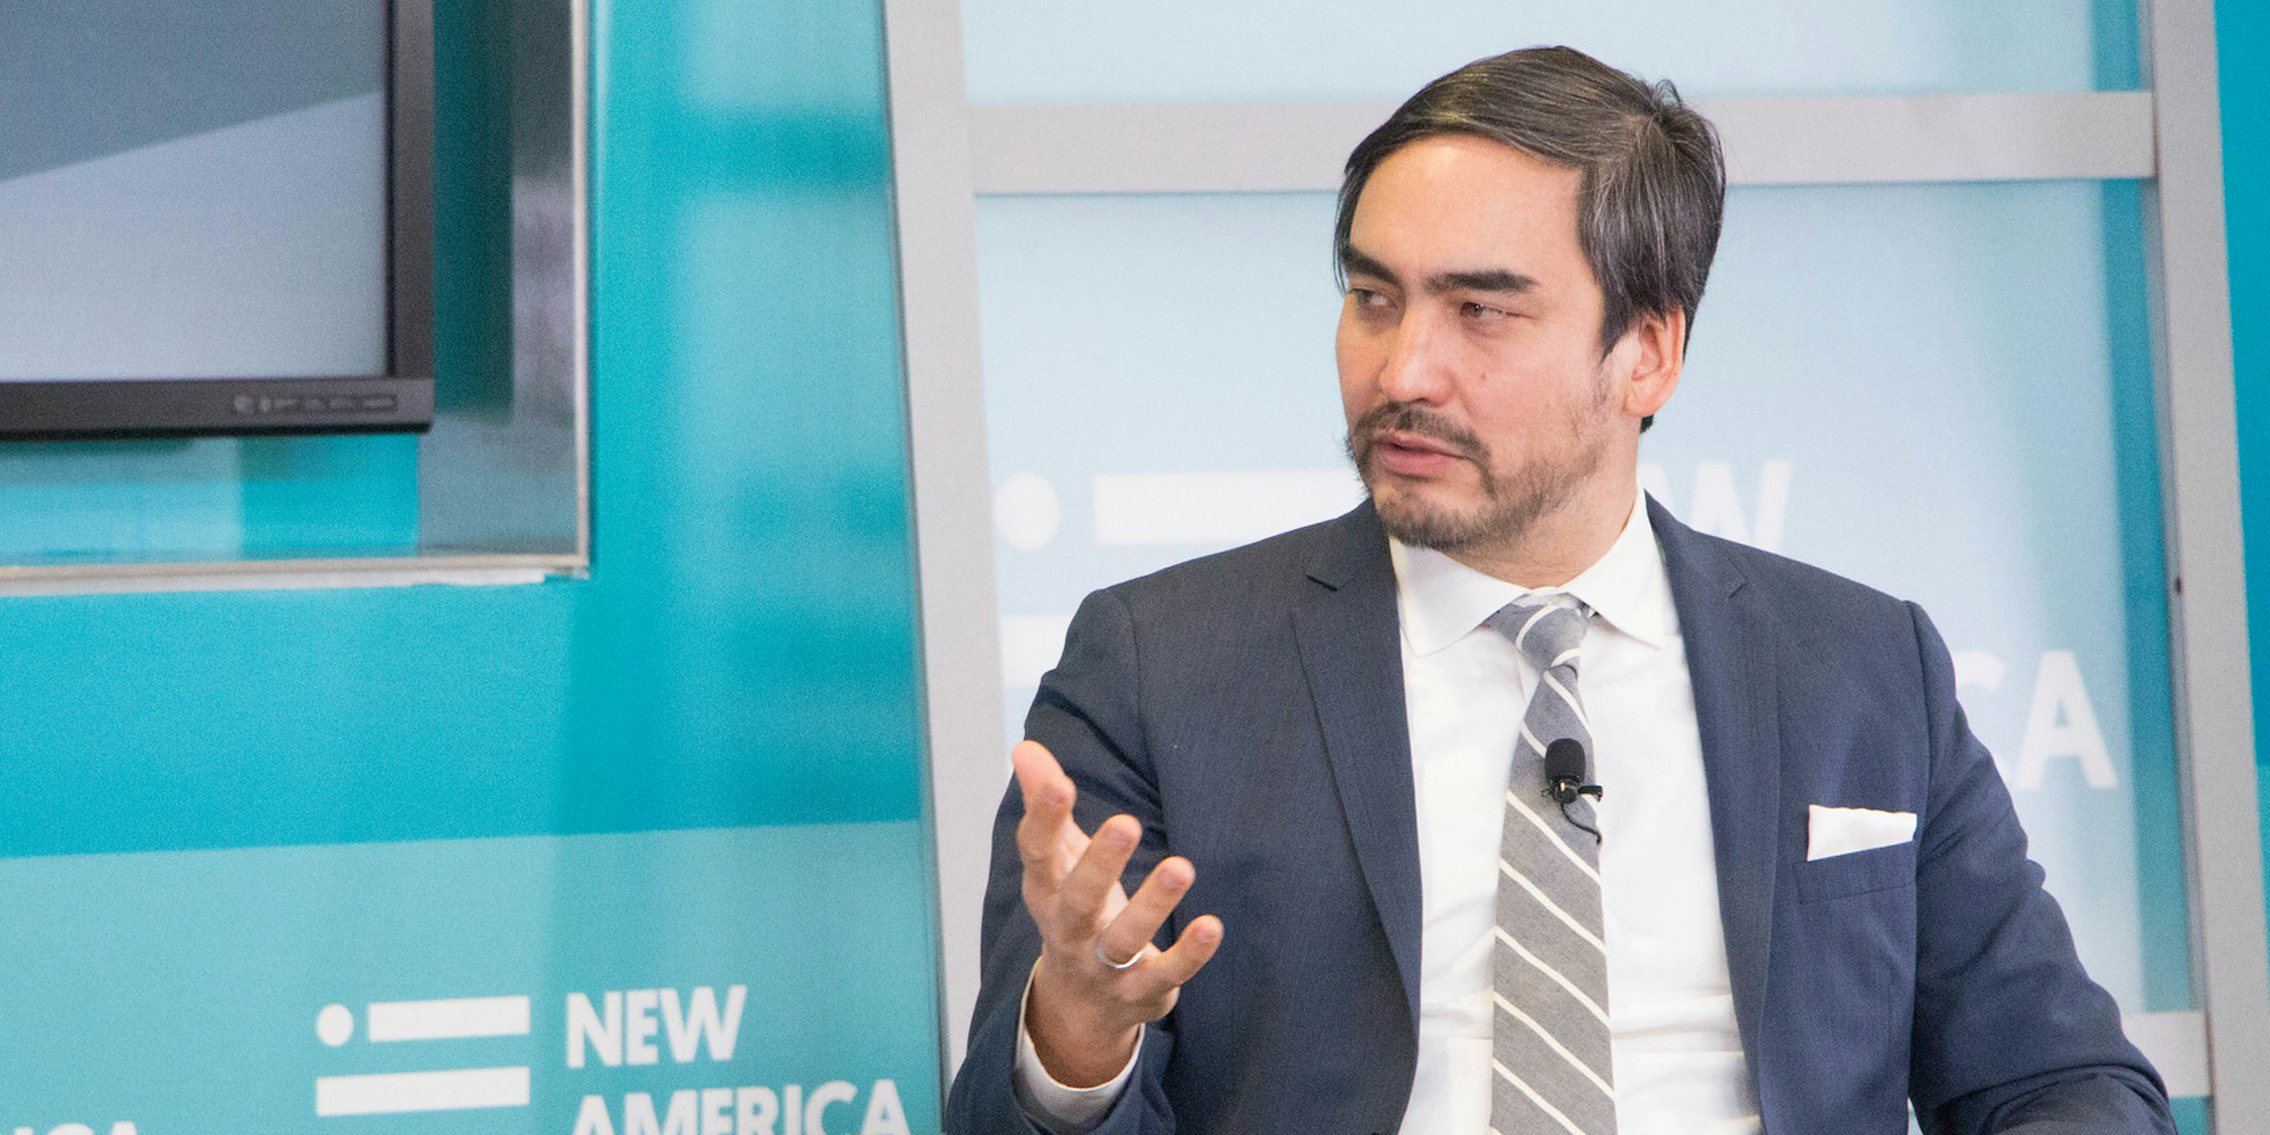 Tim Wu speaking at a conference in 2018.